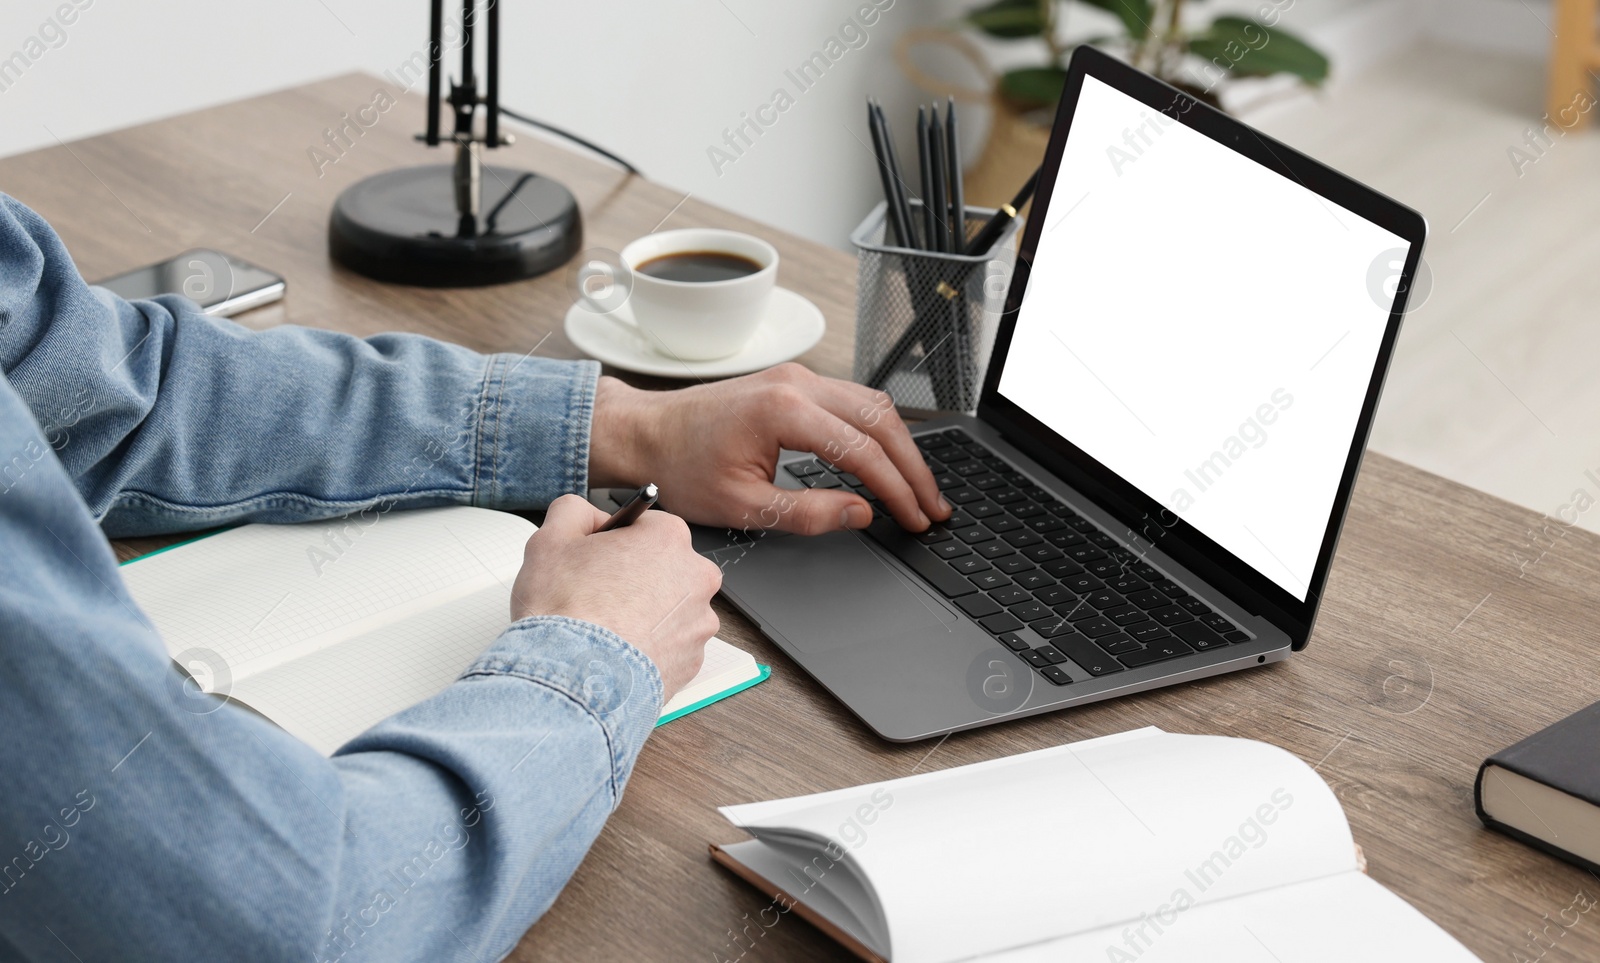 Photo of E-learning. Man using laptop during online lesson at table indoors, closeup